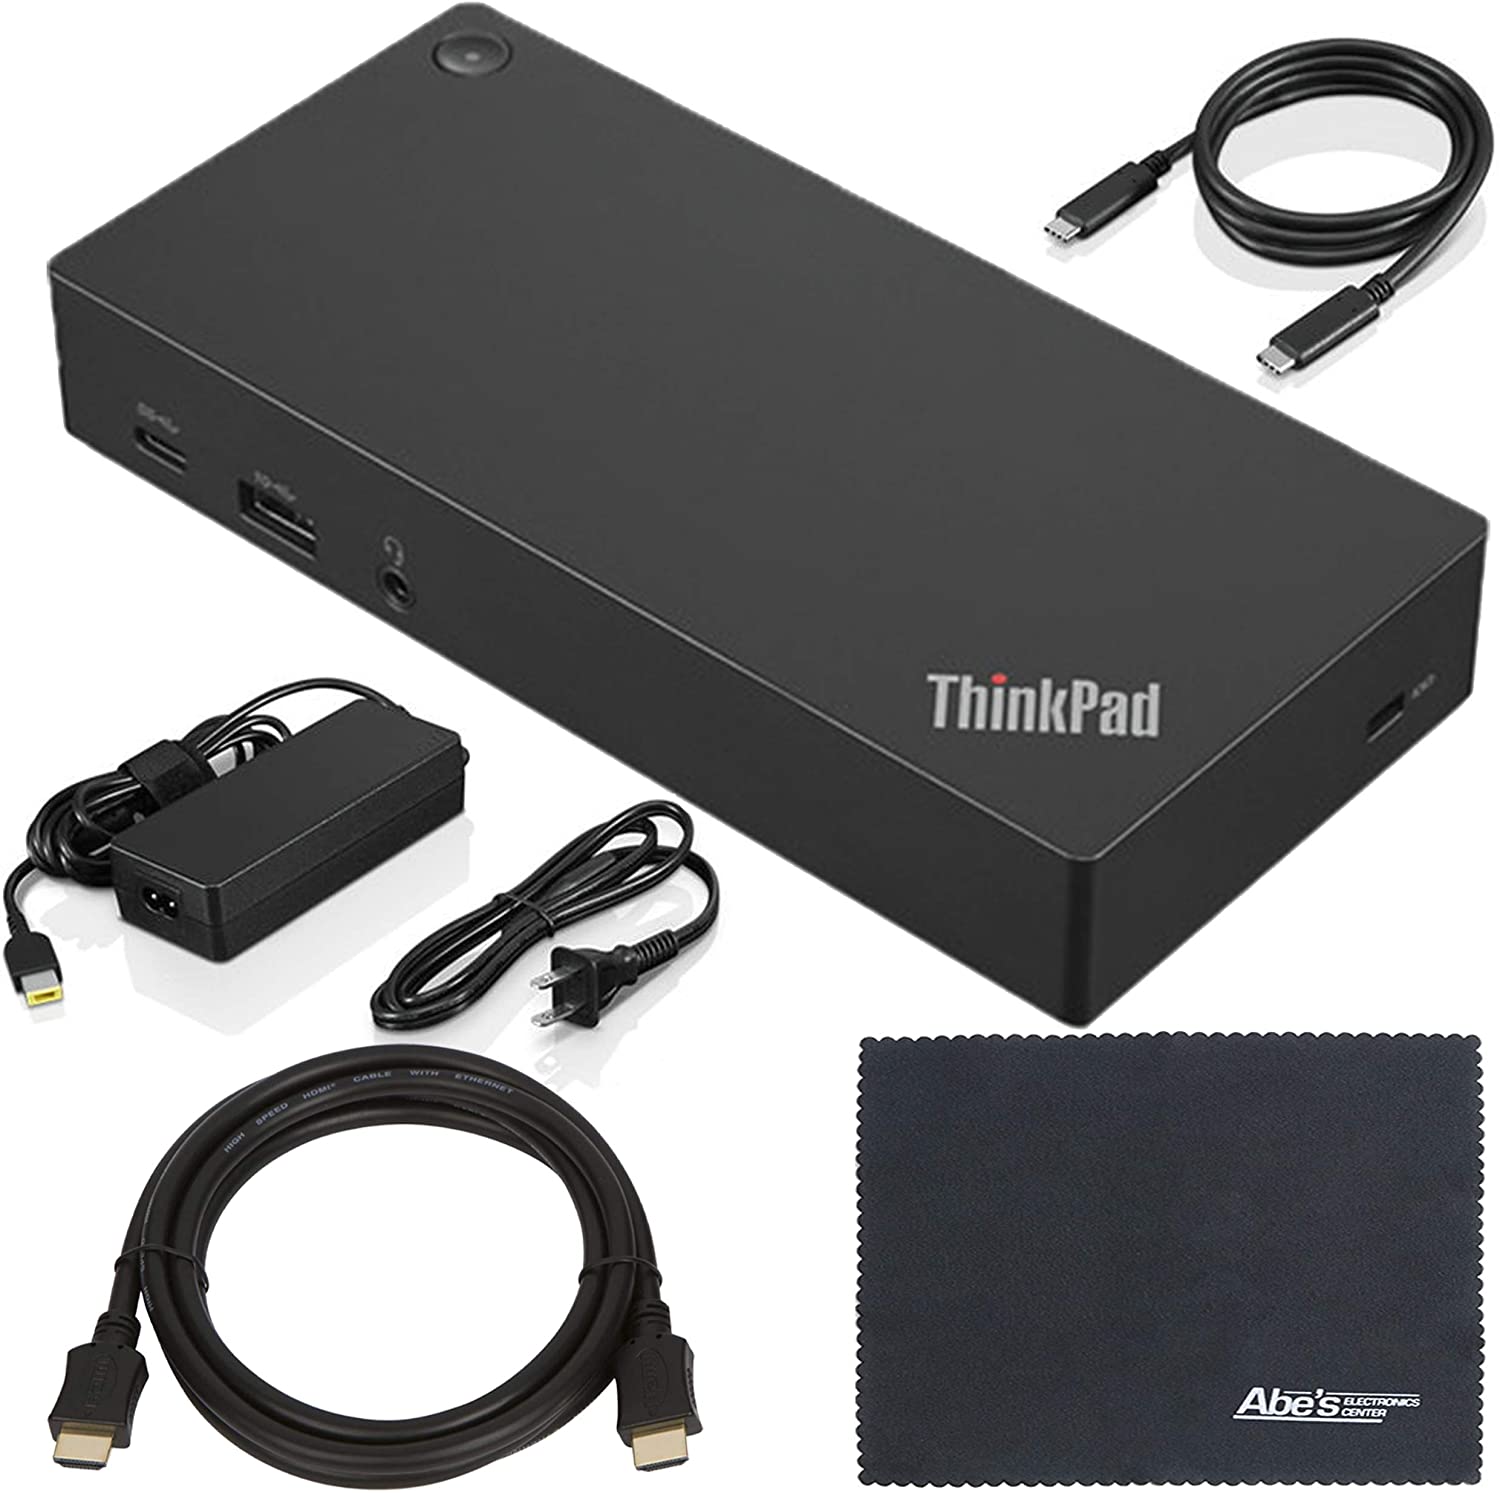 Lenovo ThinkPad (40AS0090US) USB tipo C Dock Gen 2 + ZoomSpeed HDMI Cable (con Ethernet)